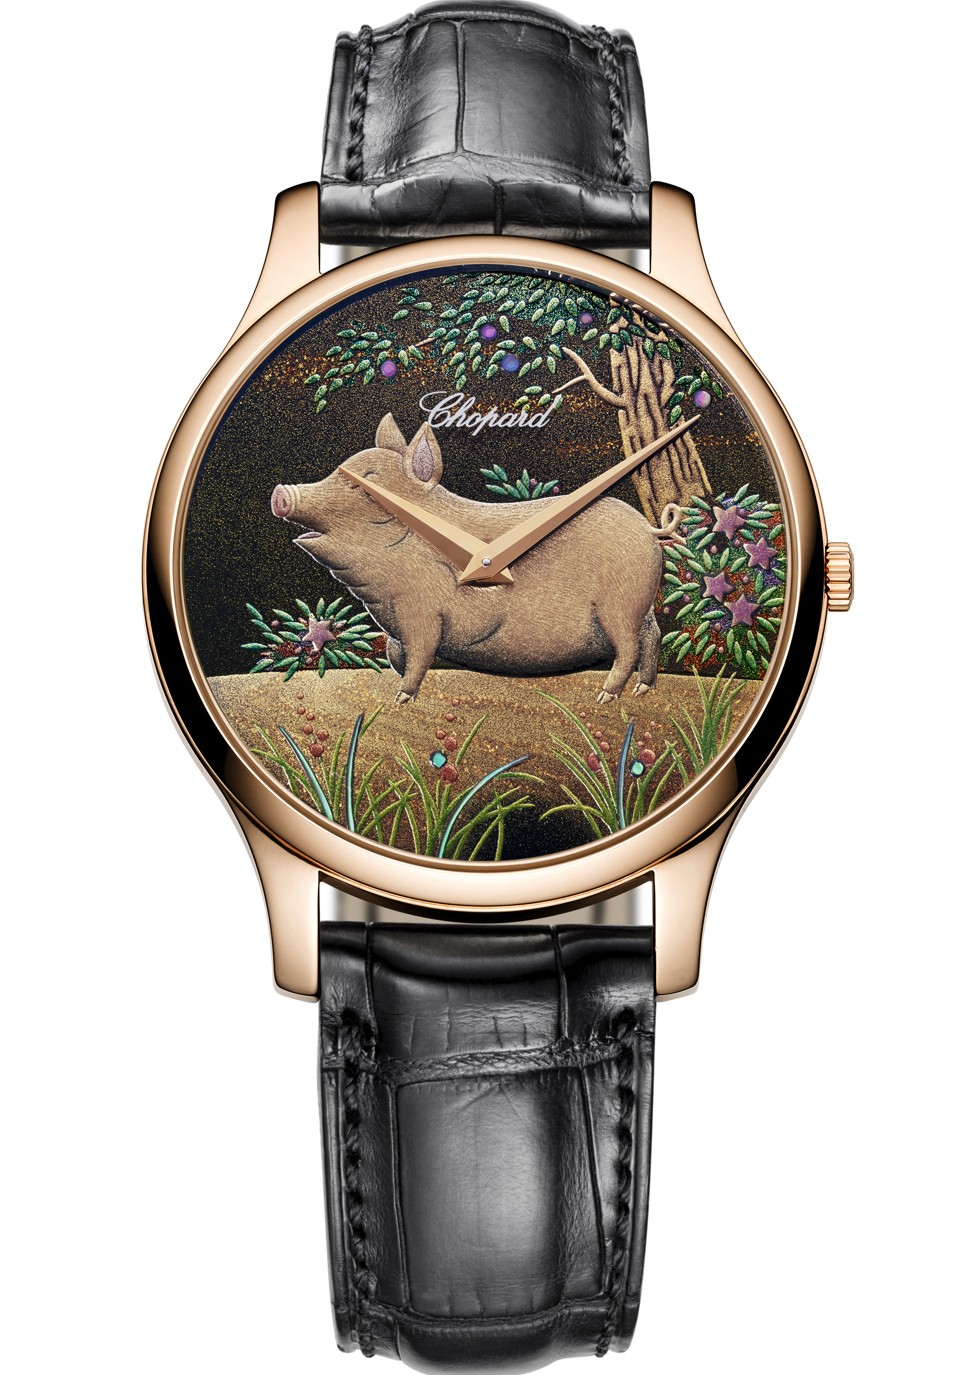 Chopard’s L.U.C XP Urushi Year of the Pig watch, which is limited to only 88 pieces.